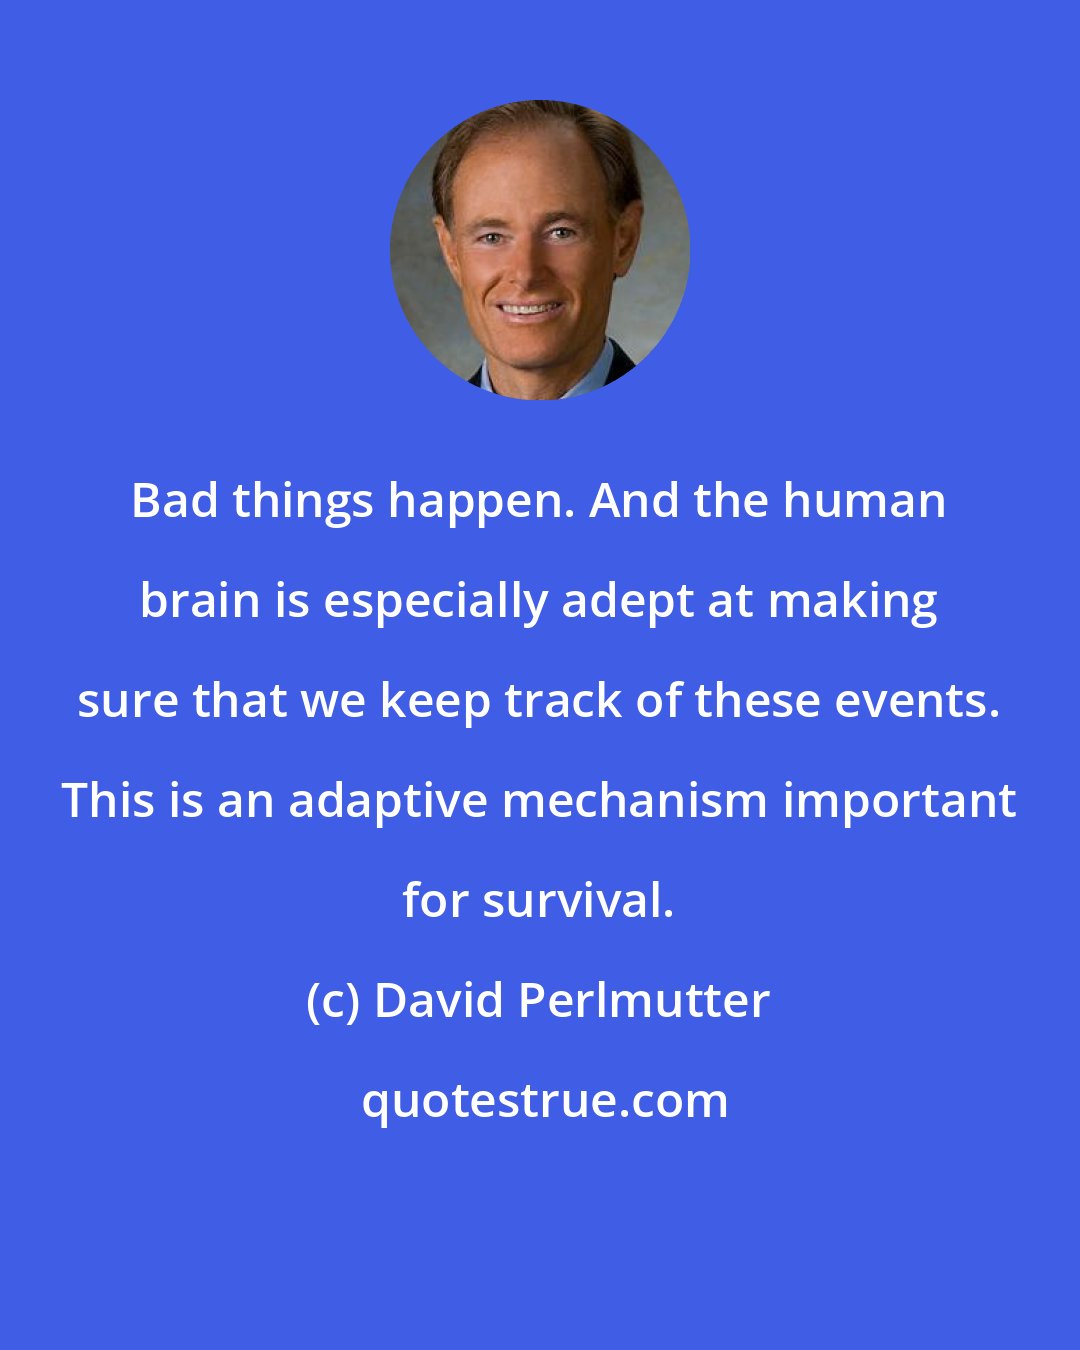 David Perlmutter: Bad things happen. And the human brain is especially adept at making sure that we keep track of these events. This is an adaptive mechanism important for survival.